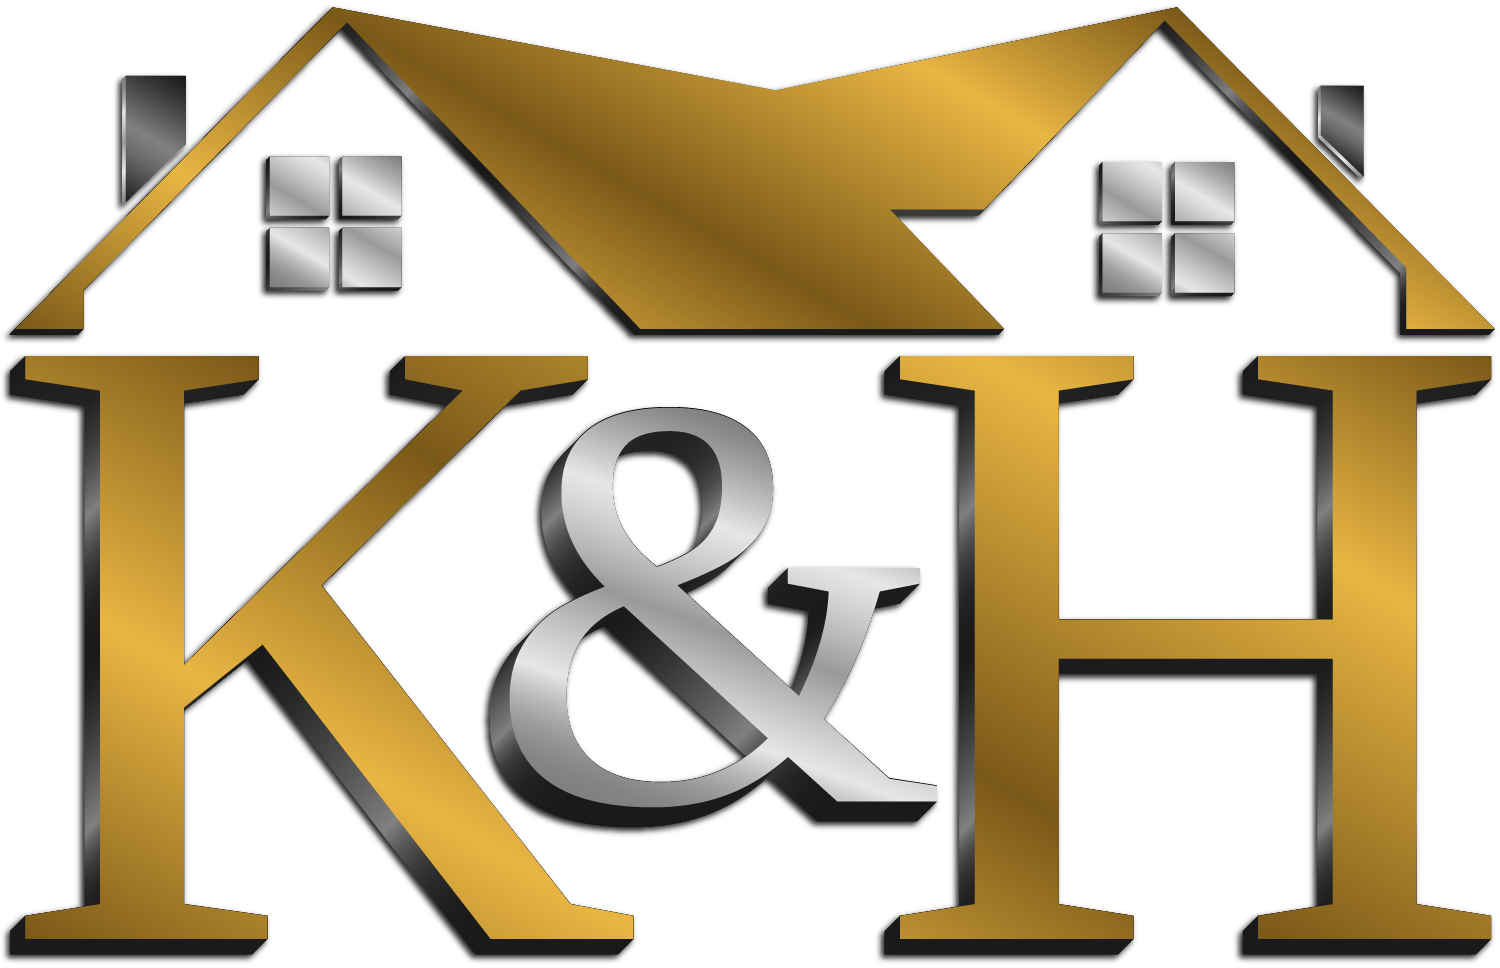 K & H General Contracting and Roofing